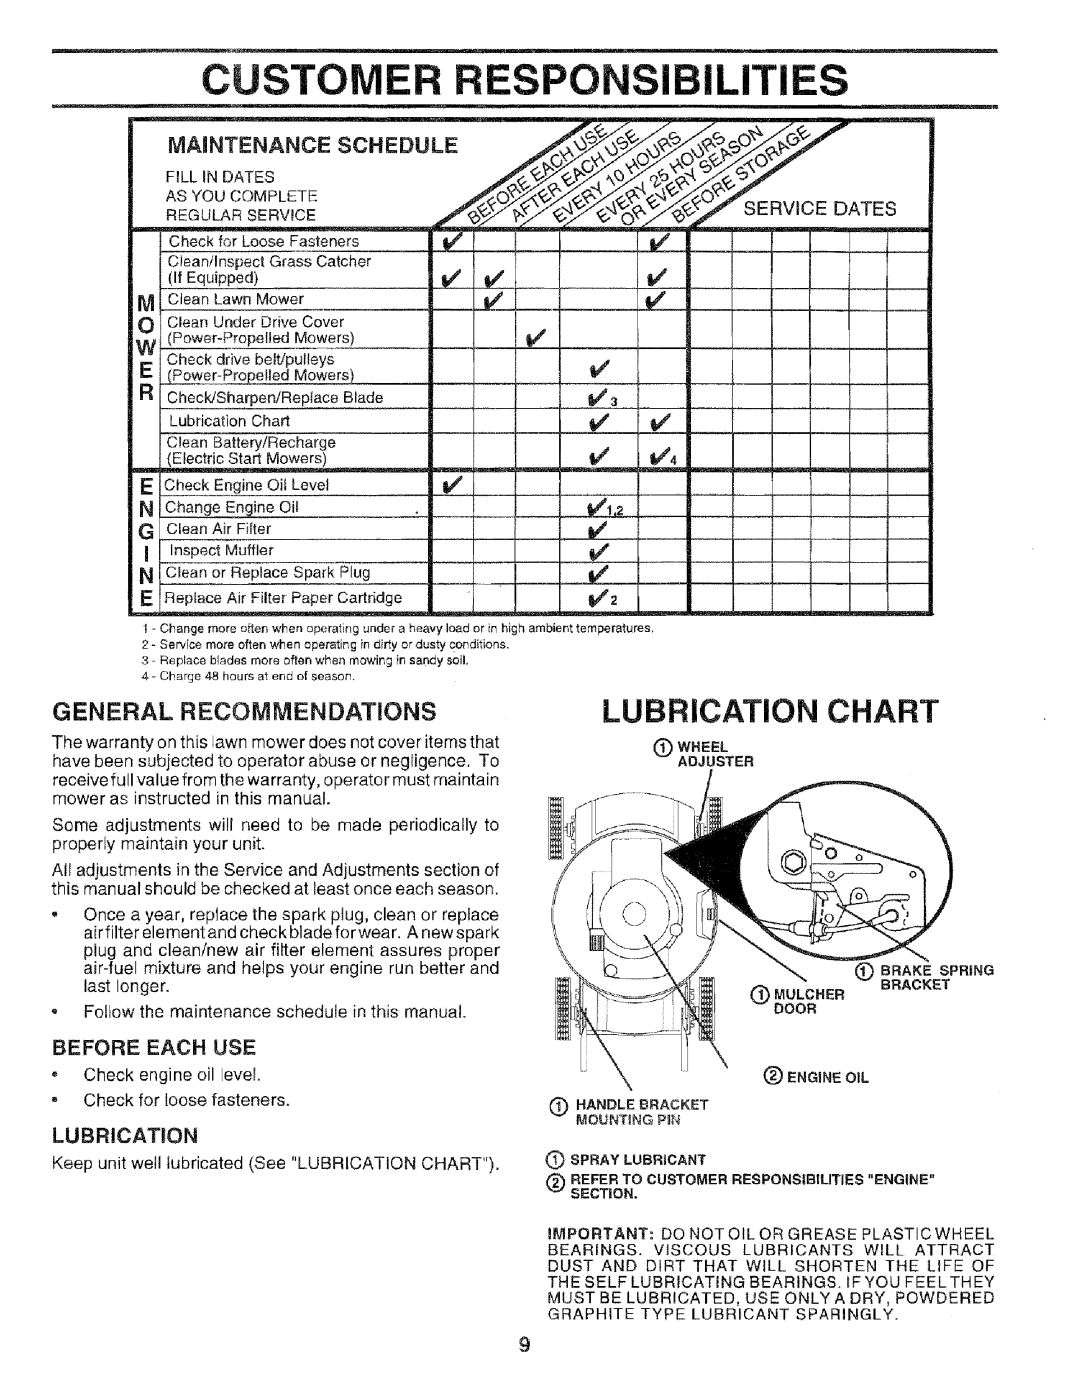 Sears 975502, 917.377201, 14.3 Customer, Lubrication Chart, General Recommendations, Maintenance Schedule, ine Oil 